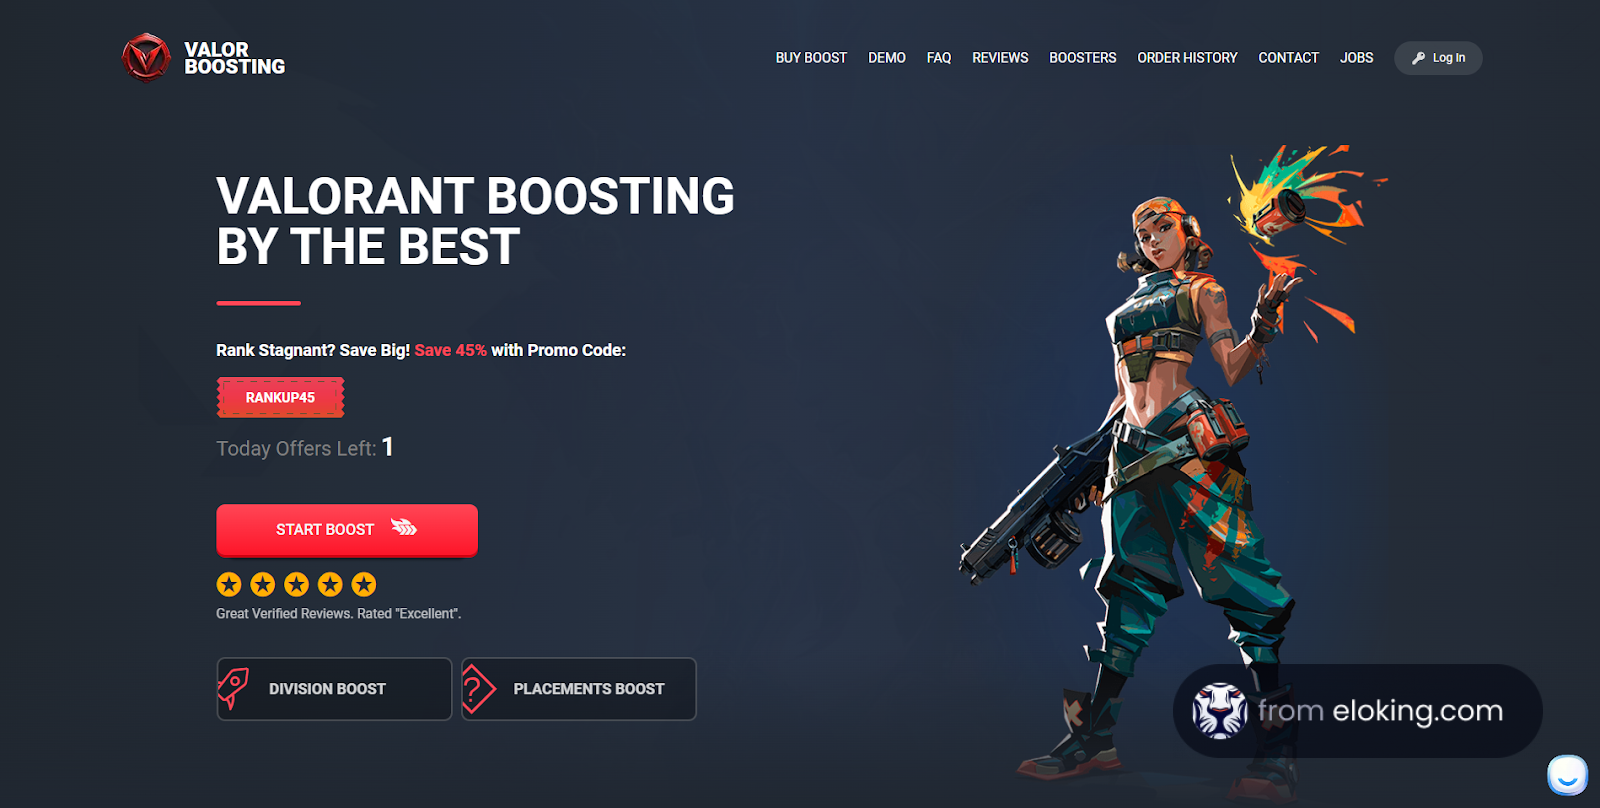 Valorant game boosting service advertisement featuring female character with colorful explosion